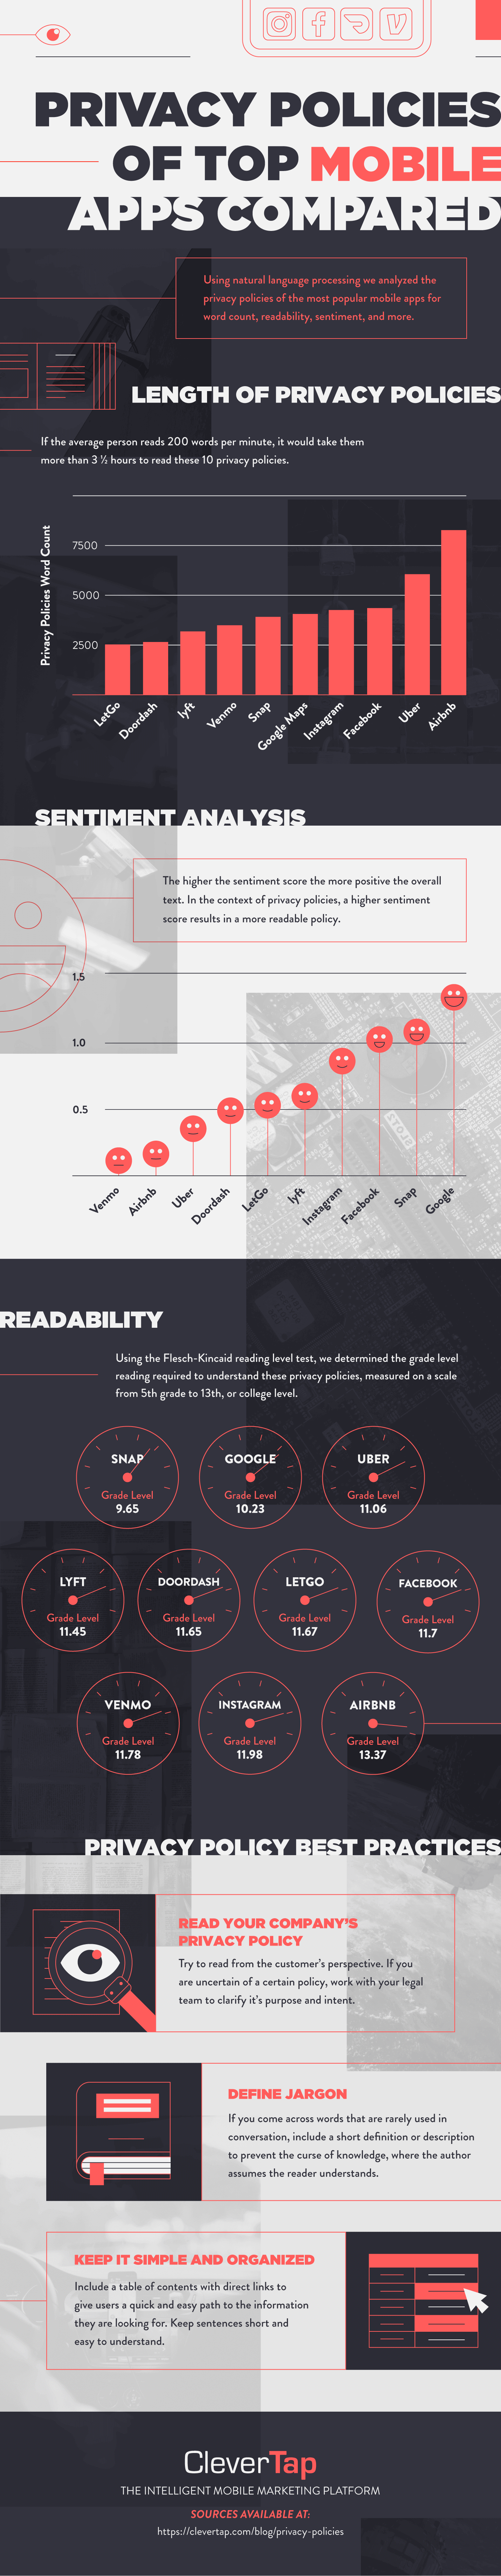 privacy policies of popular apps compared and analyzed for readability infographic